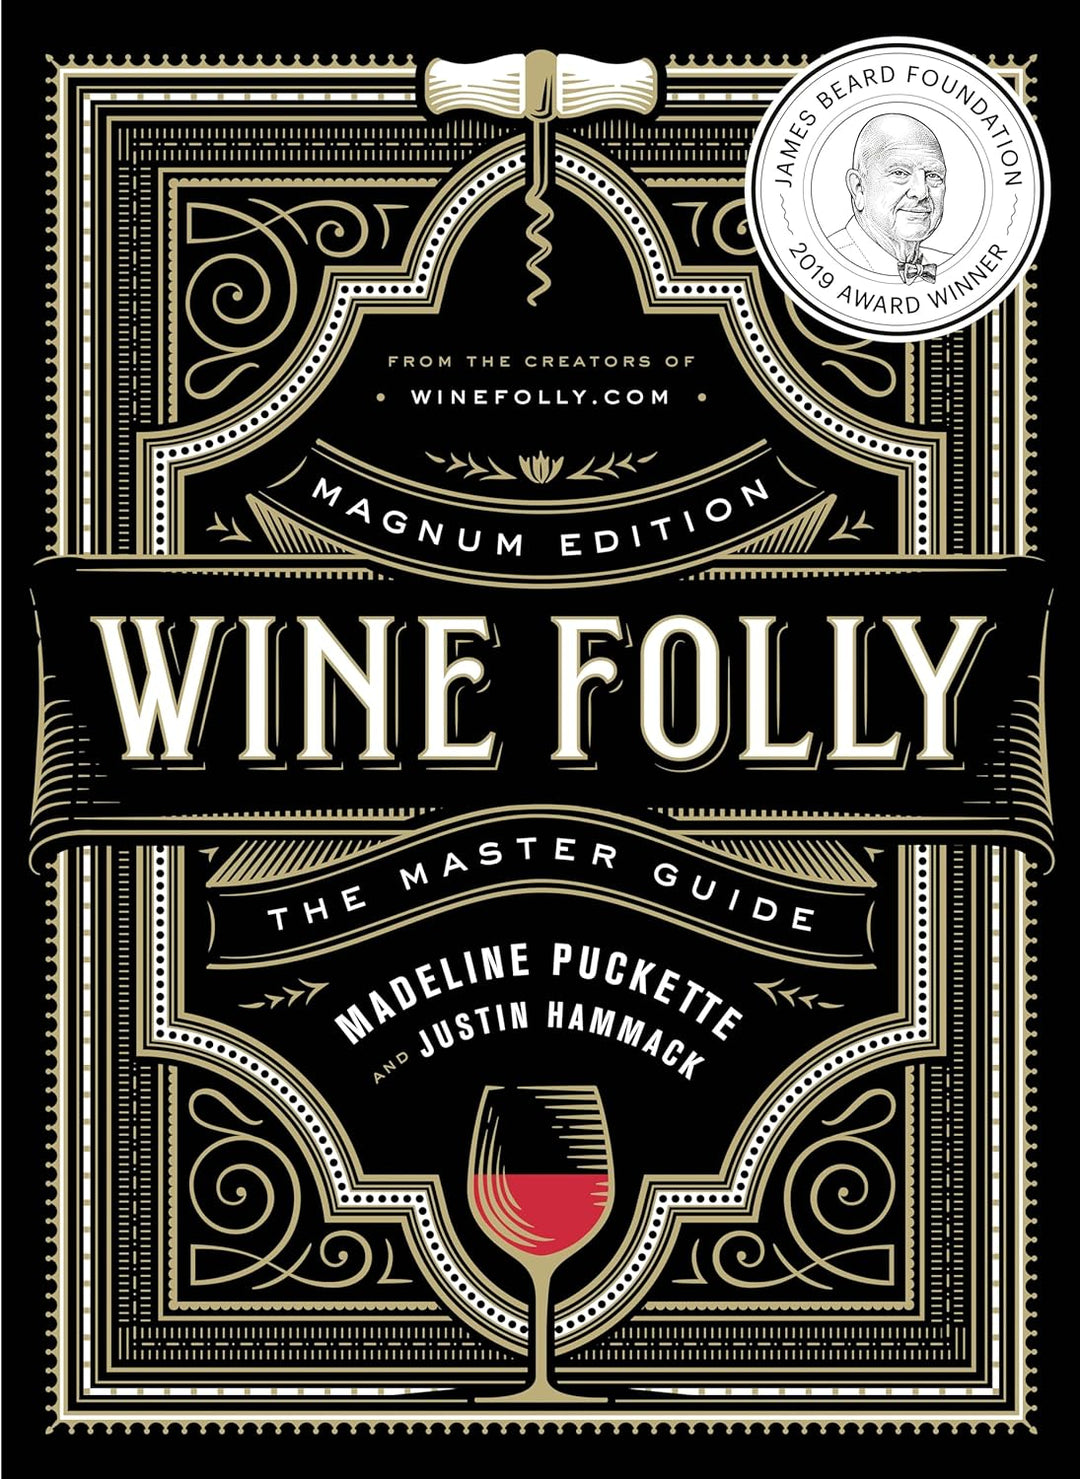 Wine Folly: Magnum Edition: The Master Guide (Inglés)